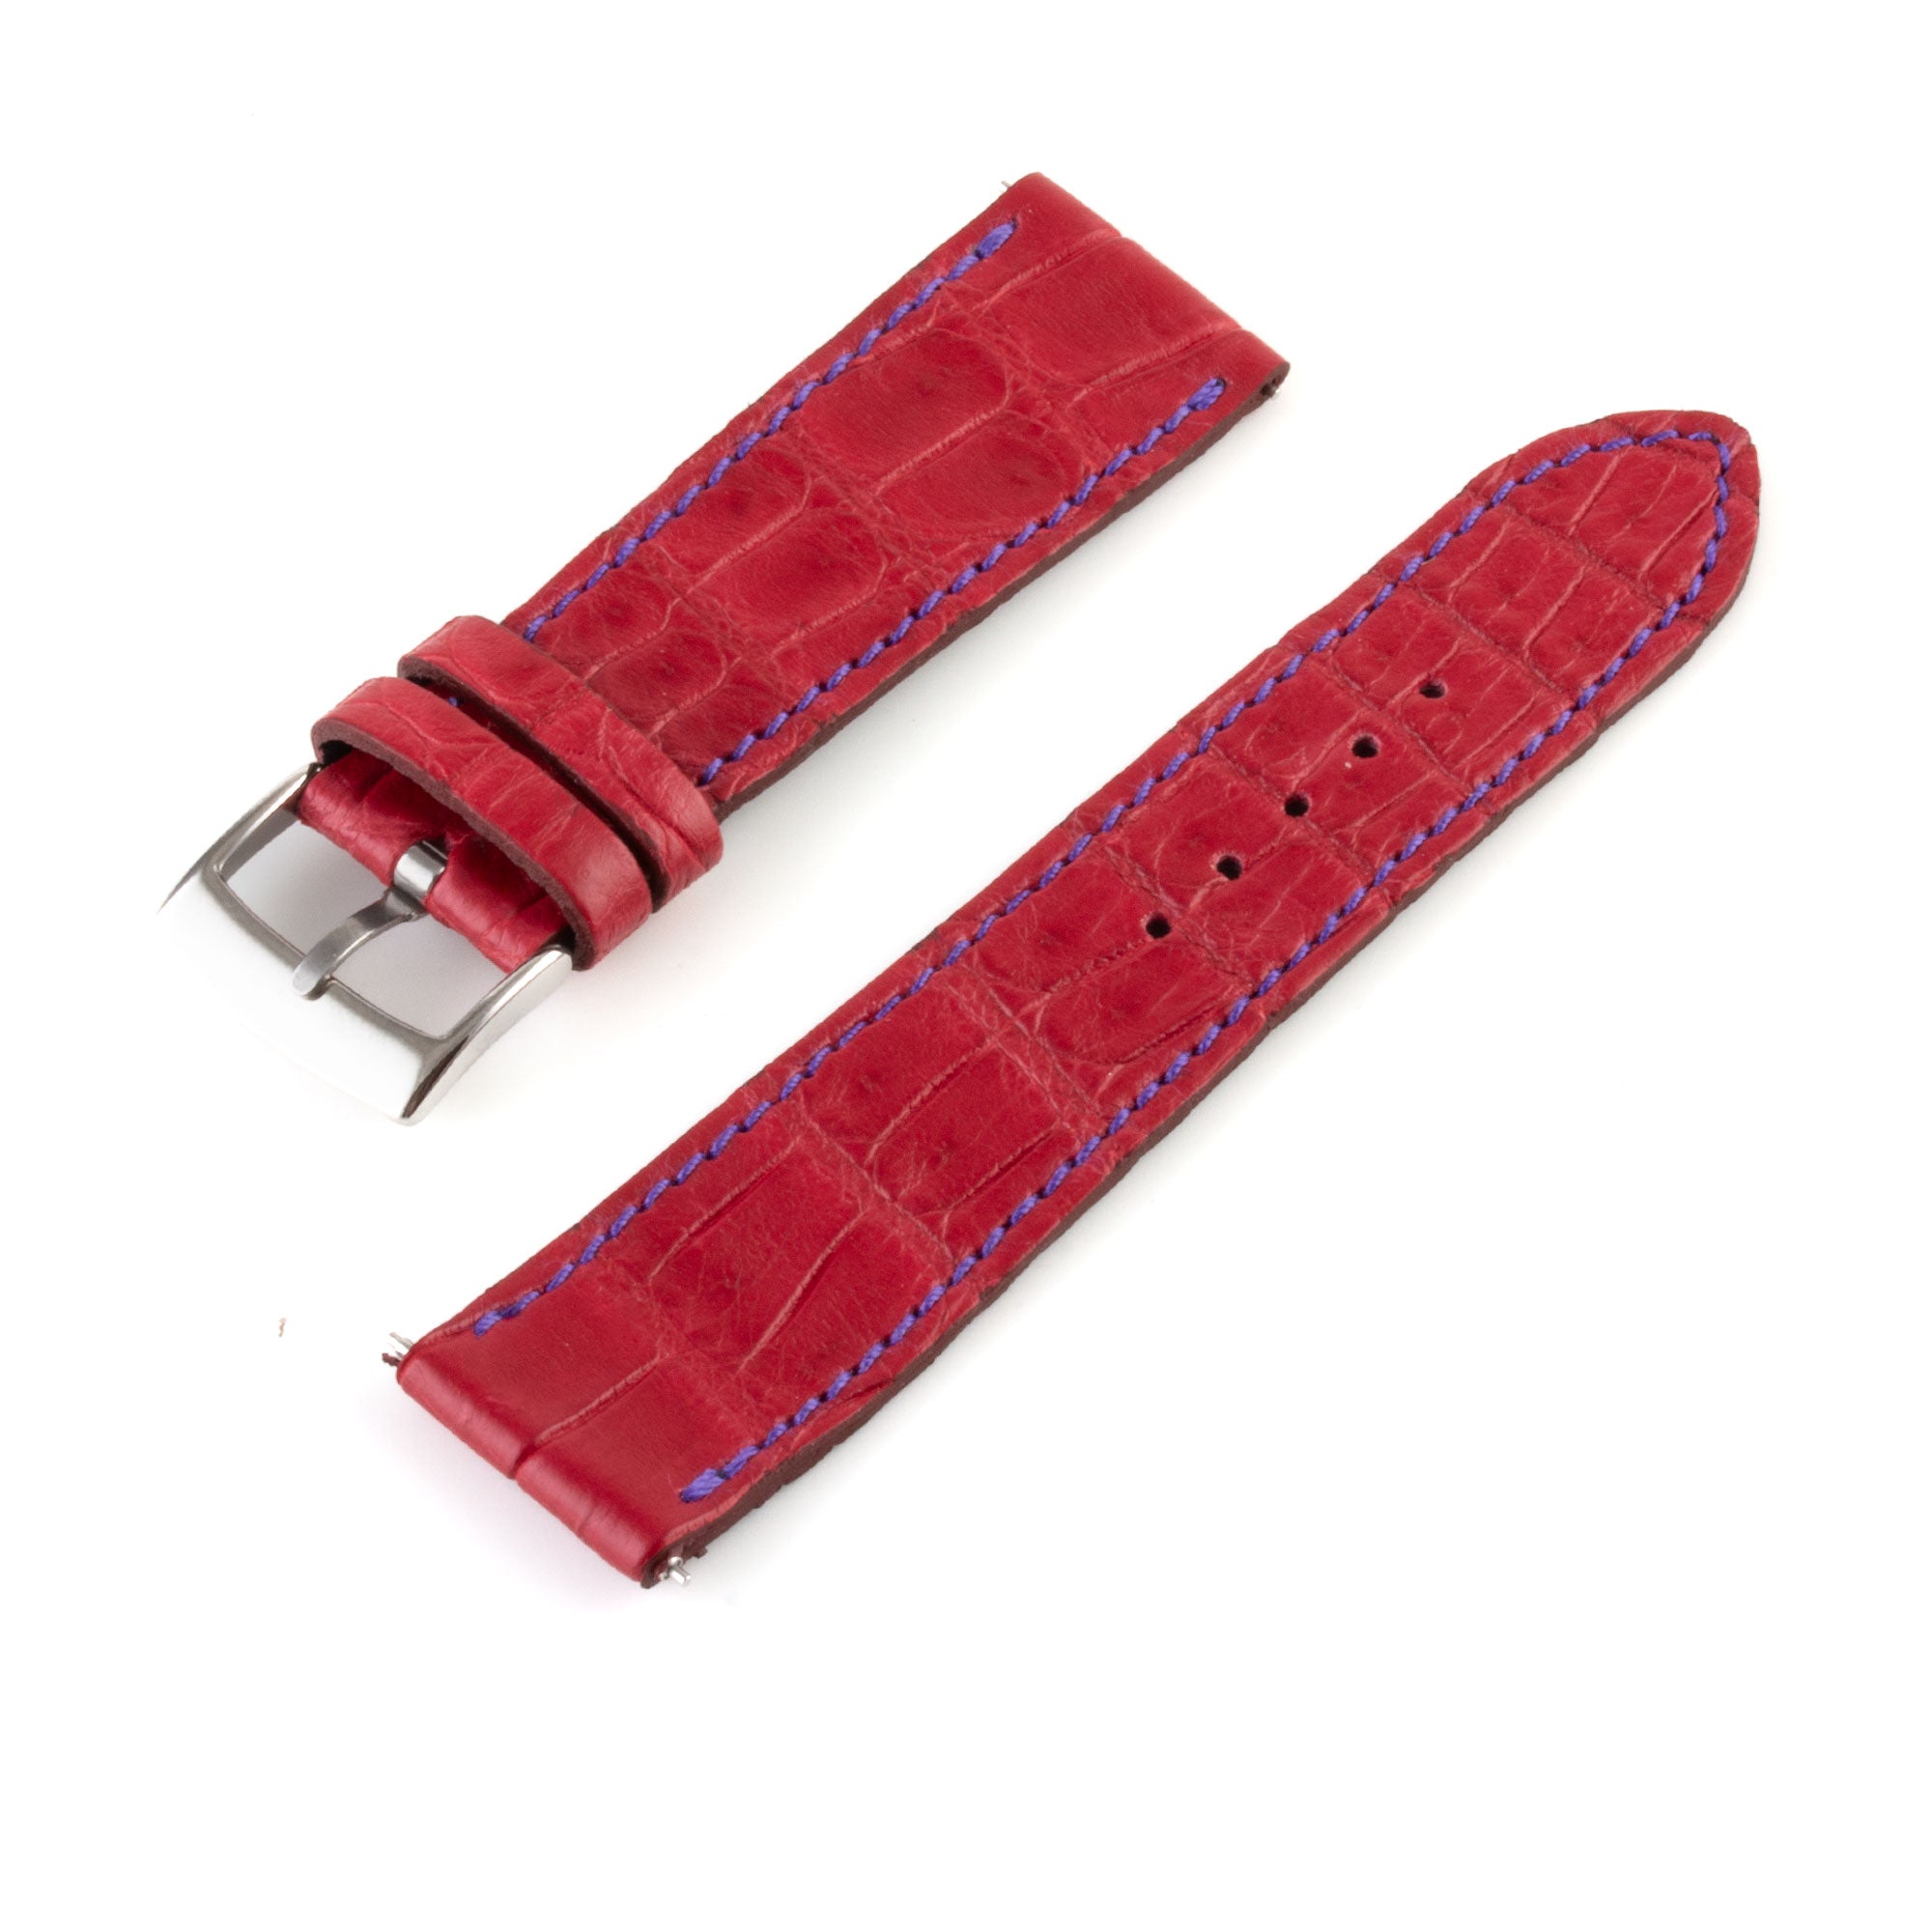 Alligator "Solo" leather watch band - 21mm width (0.83 inches) / Size M (n° 1)